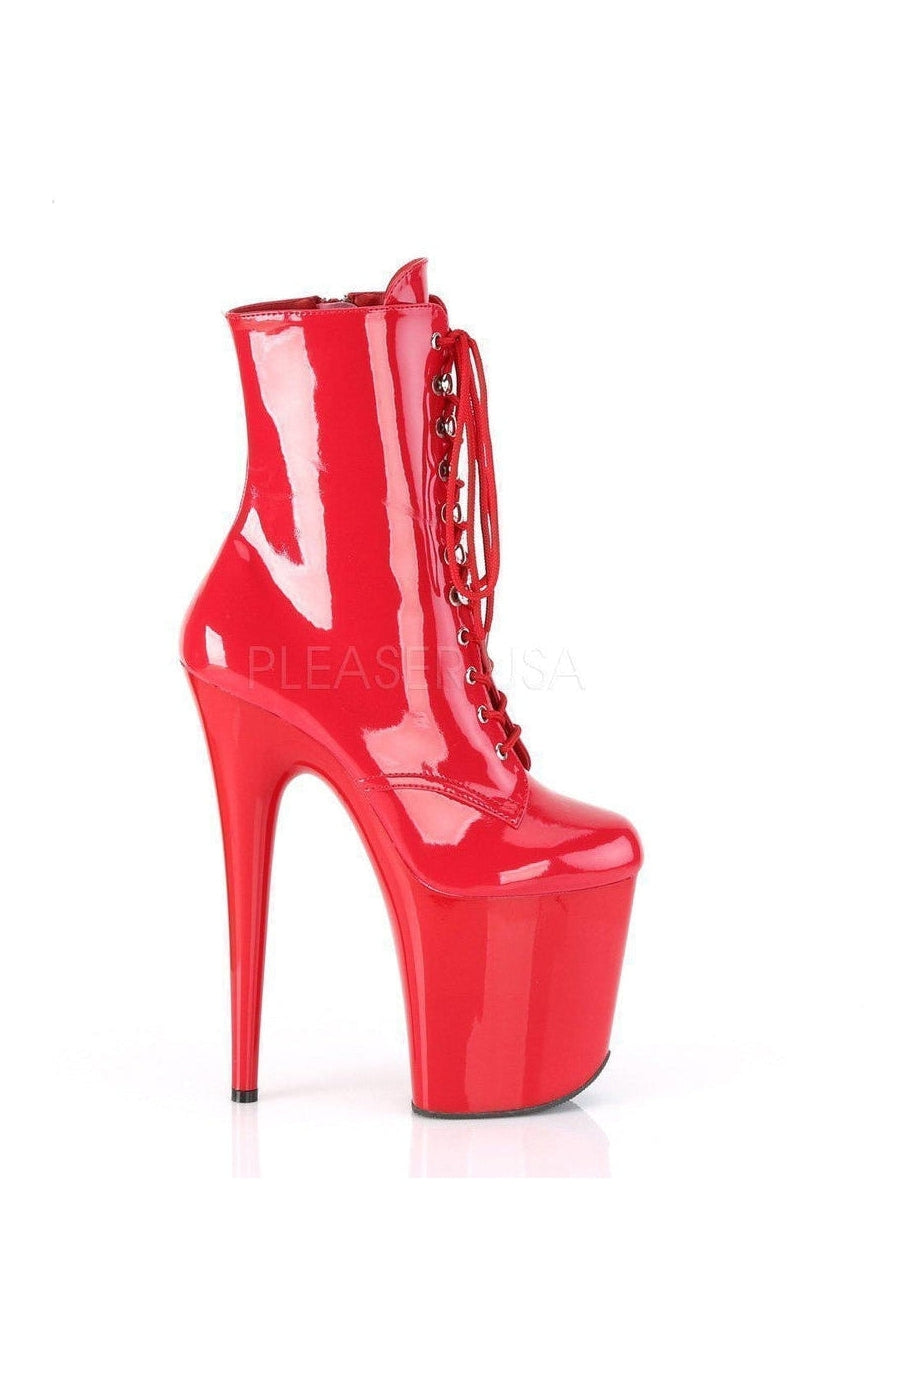 FLAMINGO-1020 Platform Ankle Boot | Red Patent-Pleaser-SEXYSHOES.COM